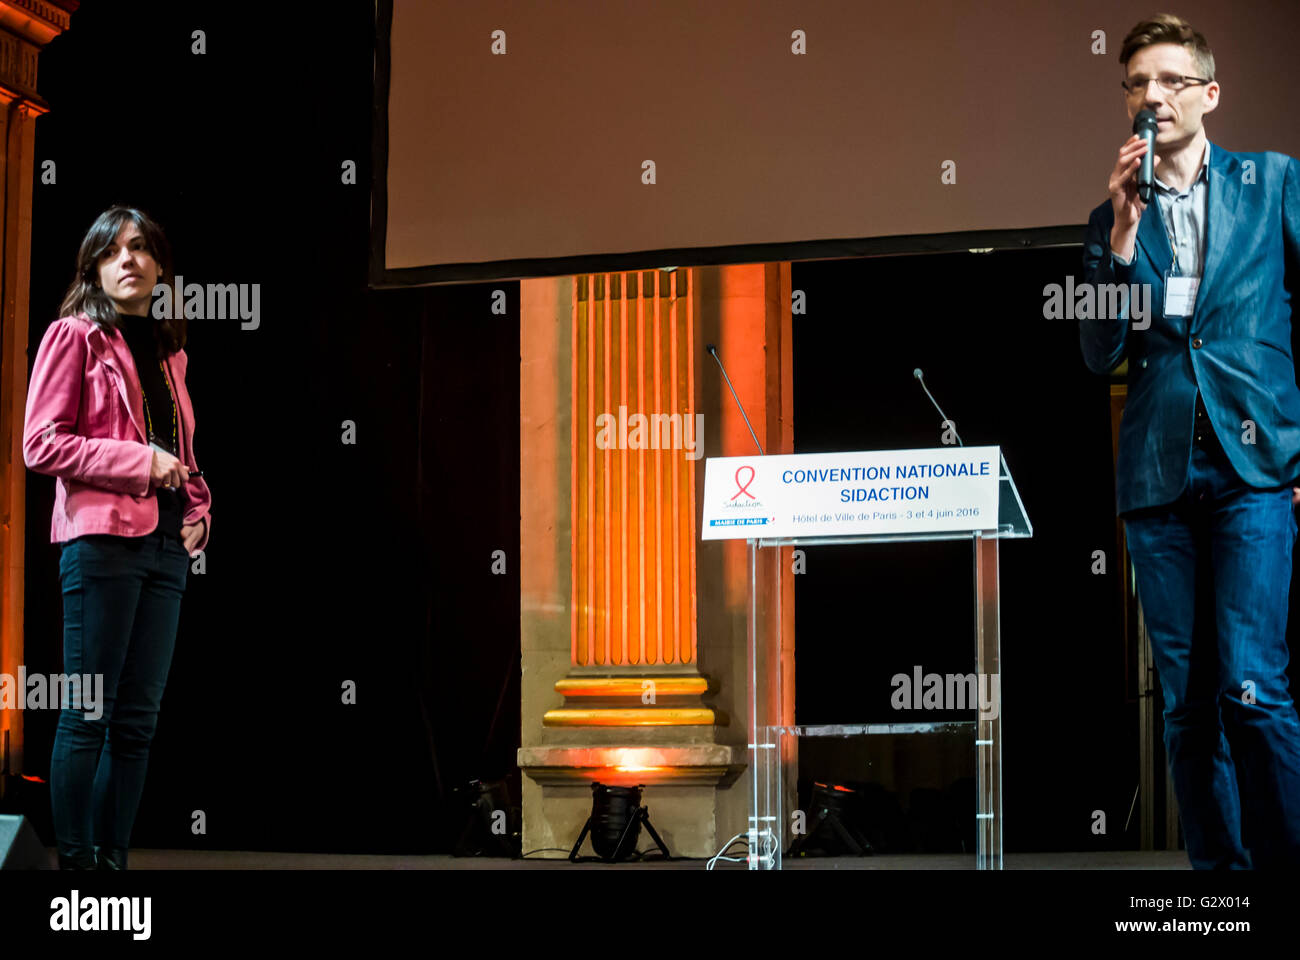 Paris, France, French Scientist Giving Presentation on AIDS/HIV in France at National AIDS Convention, Sidaction, 'Virginie Supervie' Stock Photo